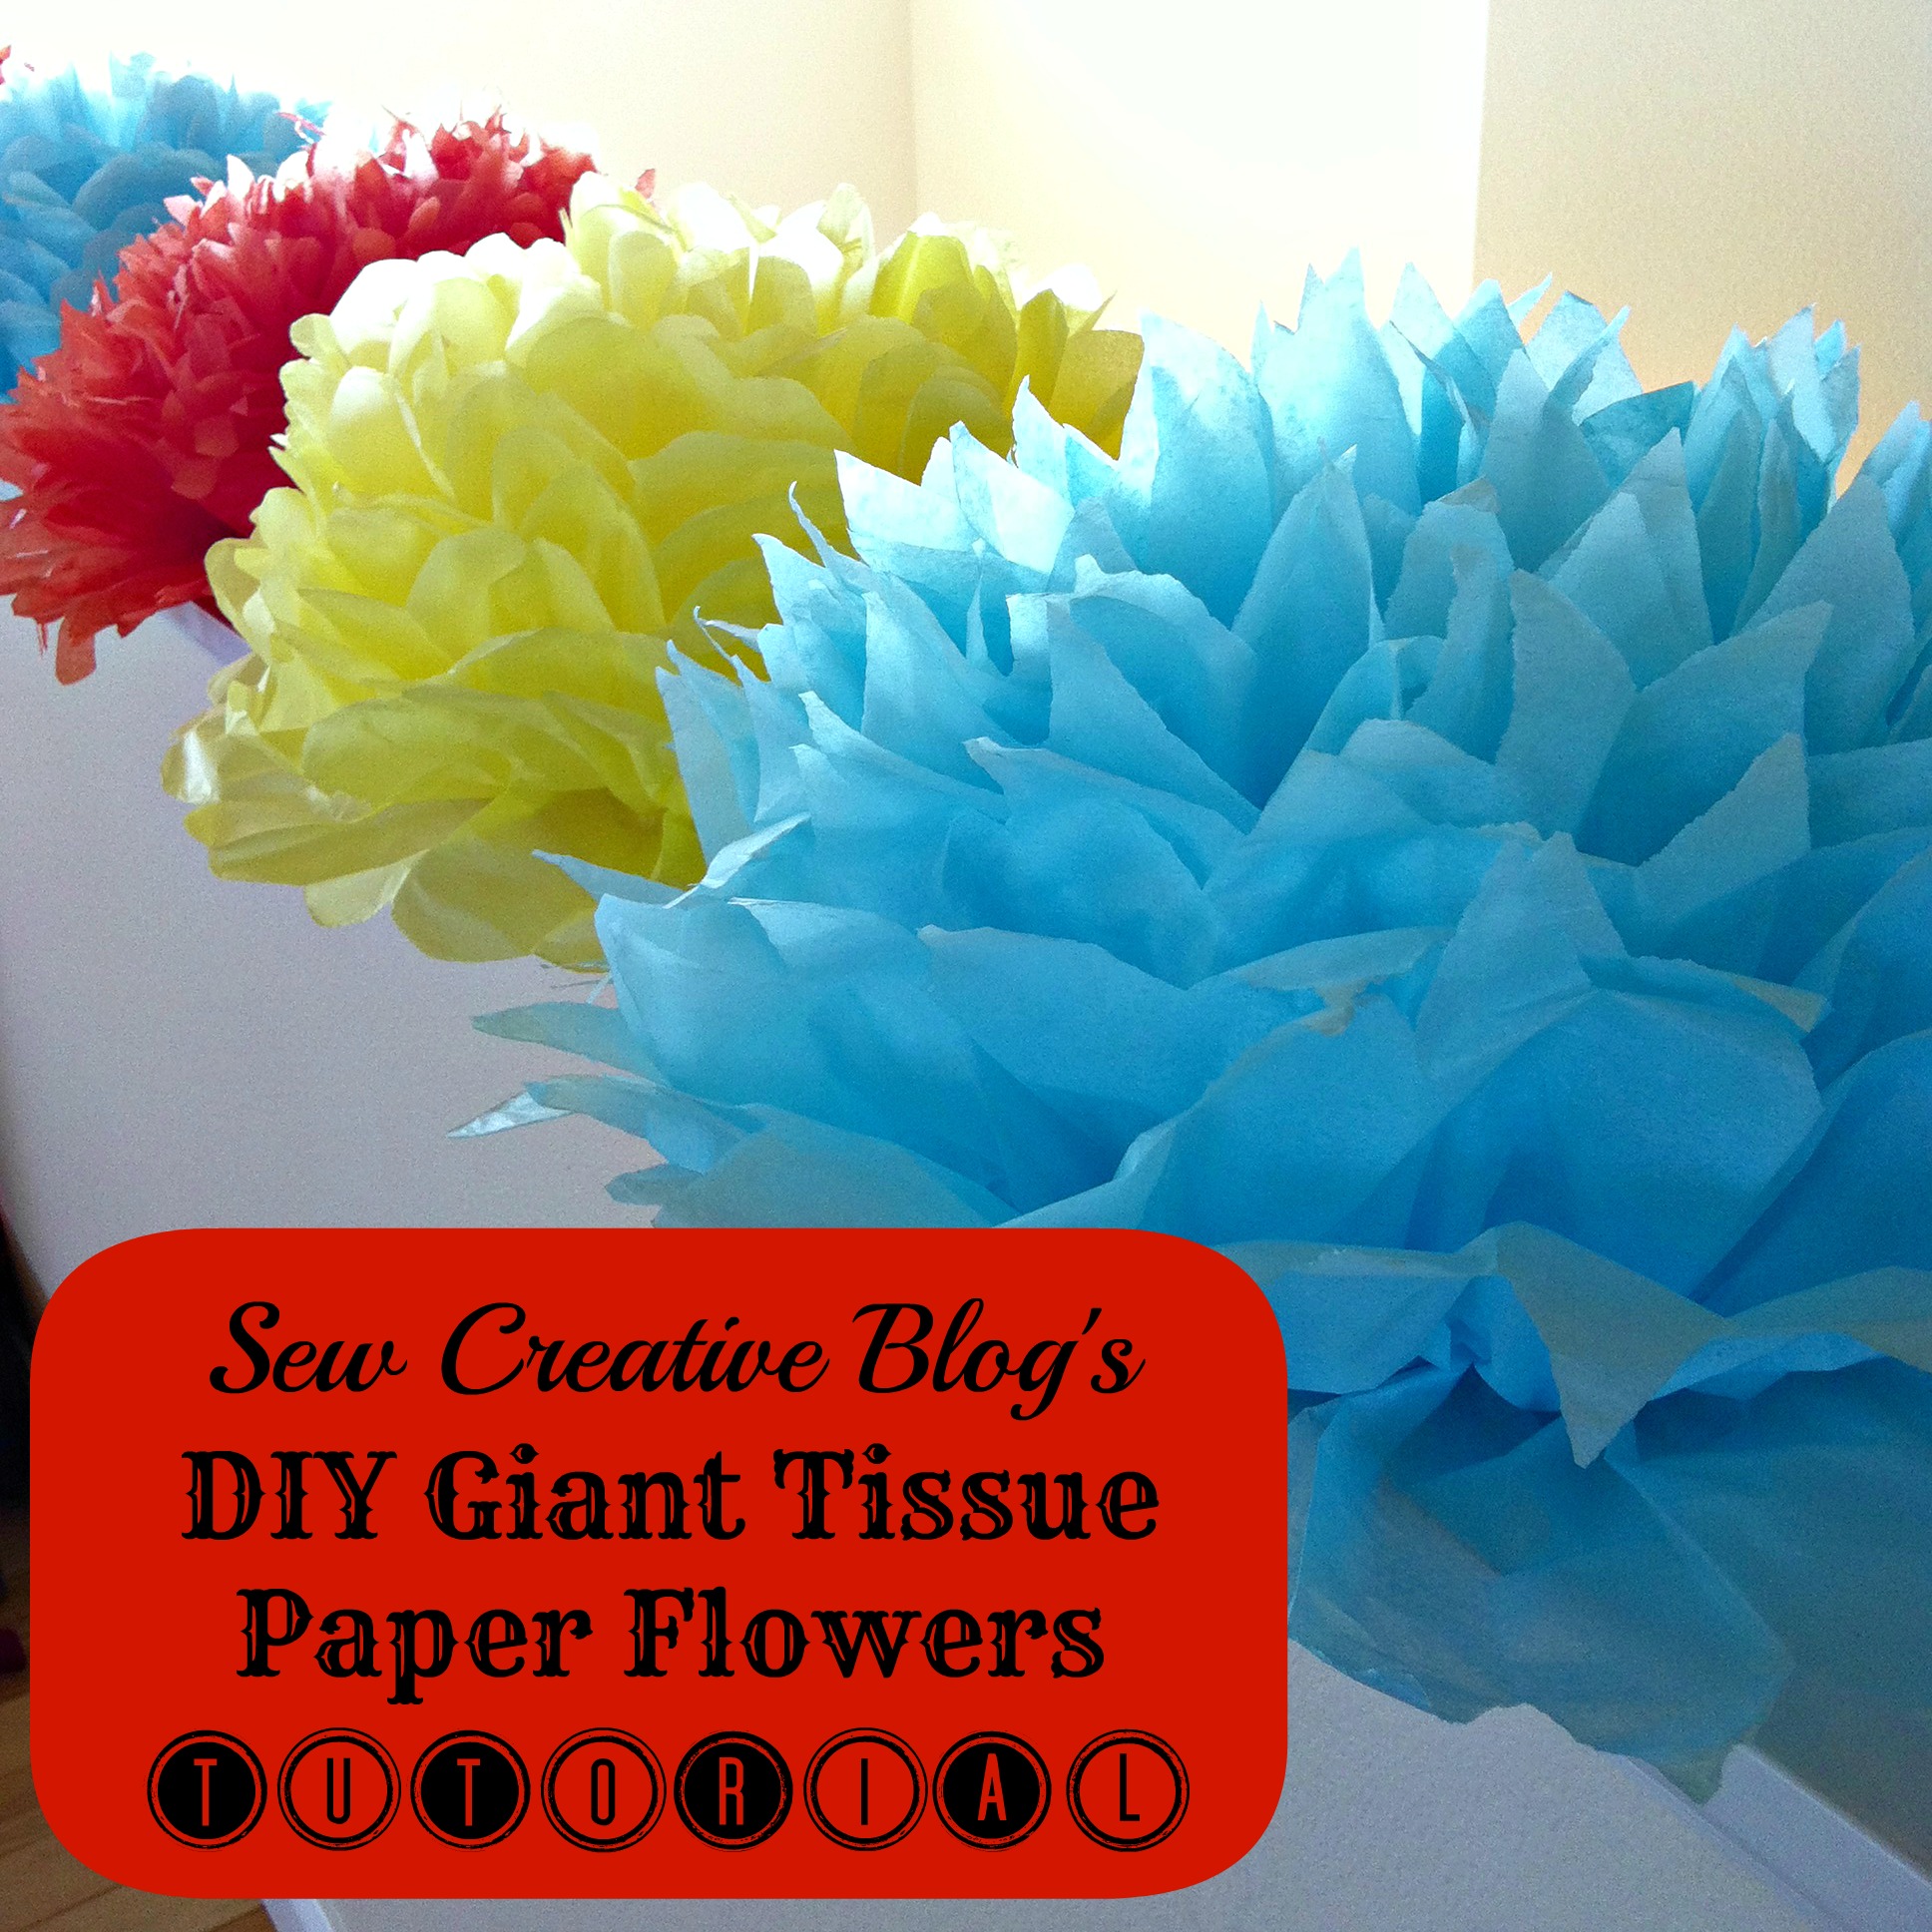 DIY Giant Handmade Tissue Paper Flowers Tutorial 2 for $1.00 Make Beautiful Birthday Party Decorations Final